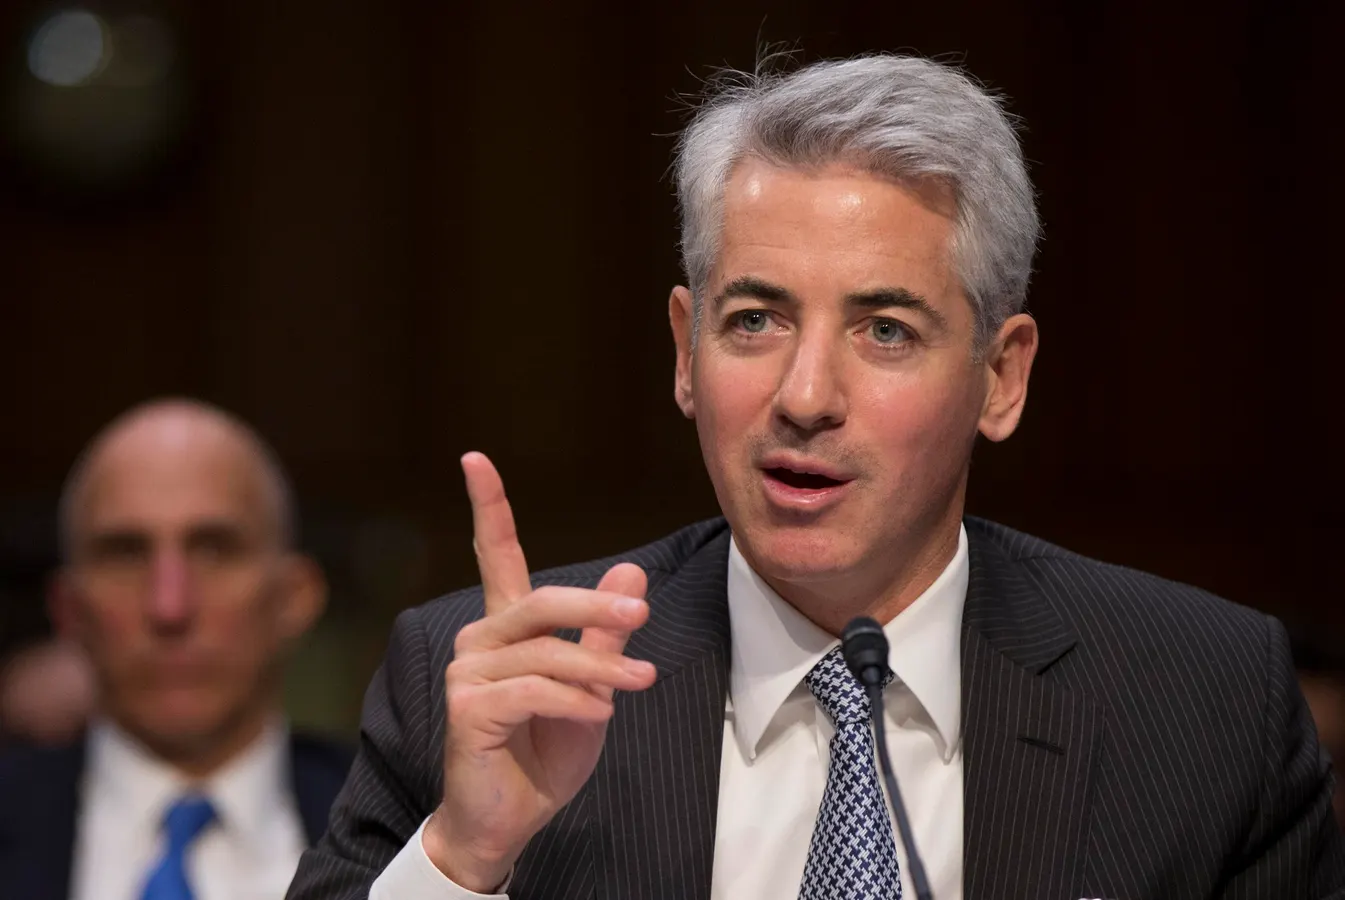 Harvard University Board Elections Stir Controversy as Bill Ackman Backs Outsider Candidates